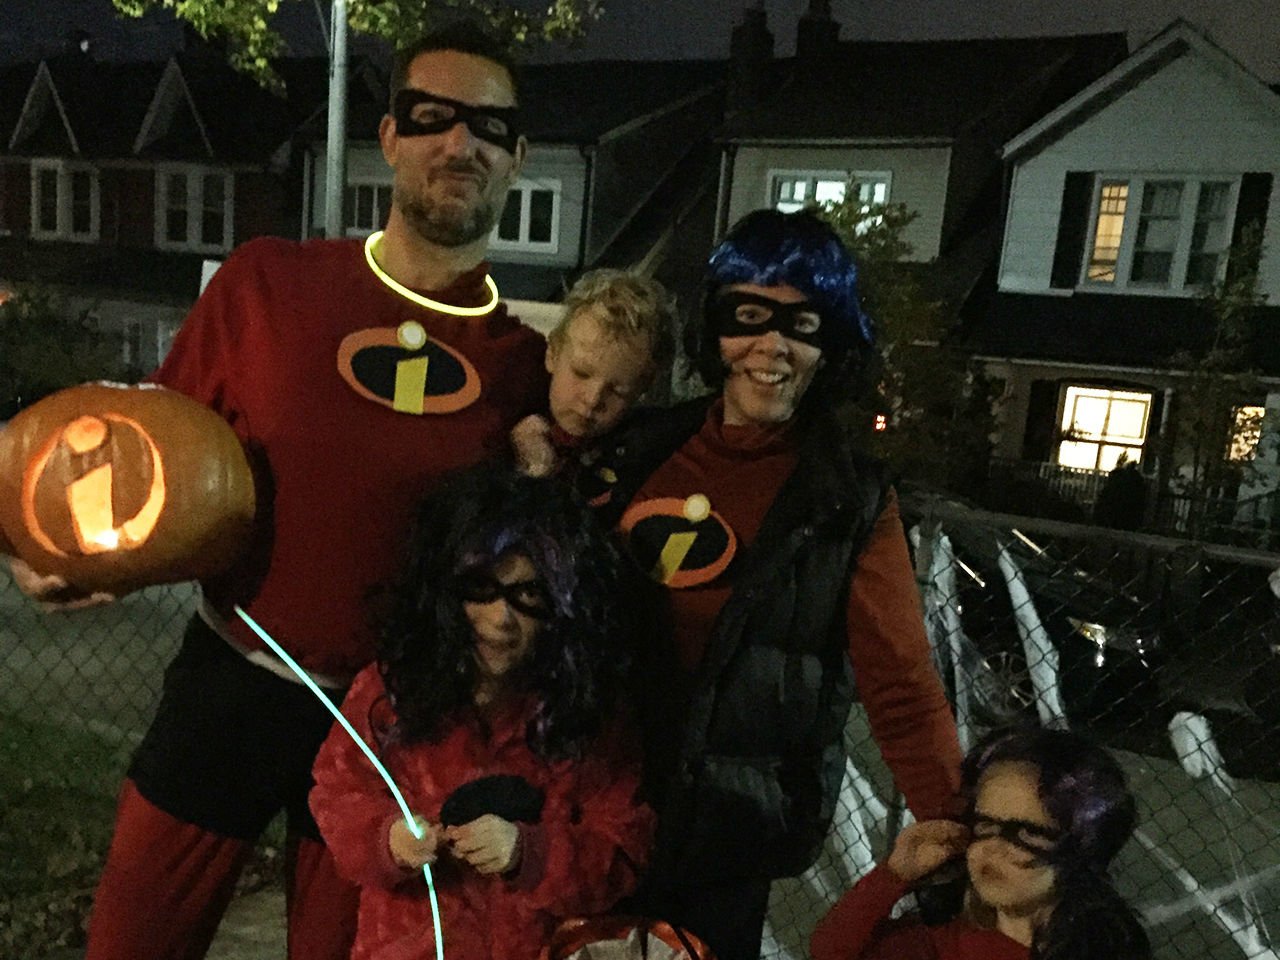 Janine Cole, her husband Mike, and their three kids dressed as The Incredibles for Halloween.